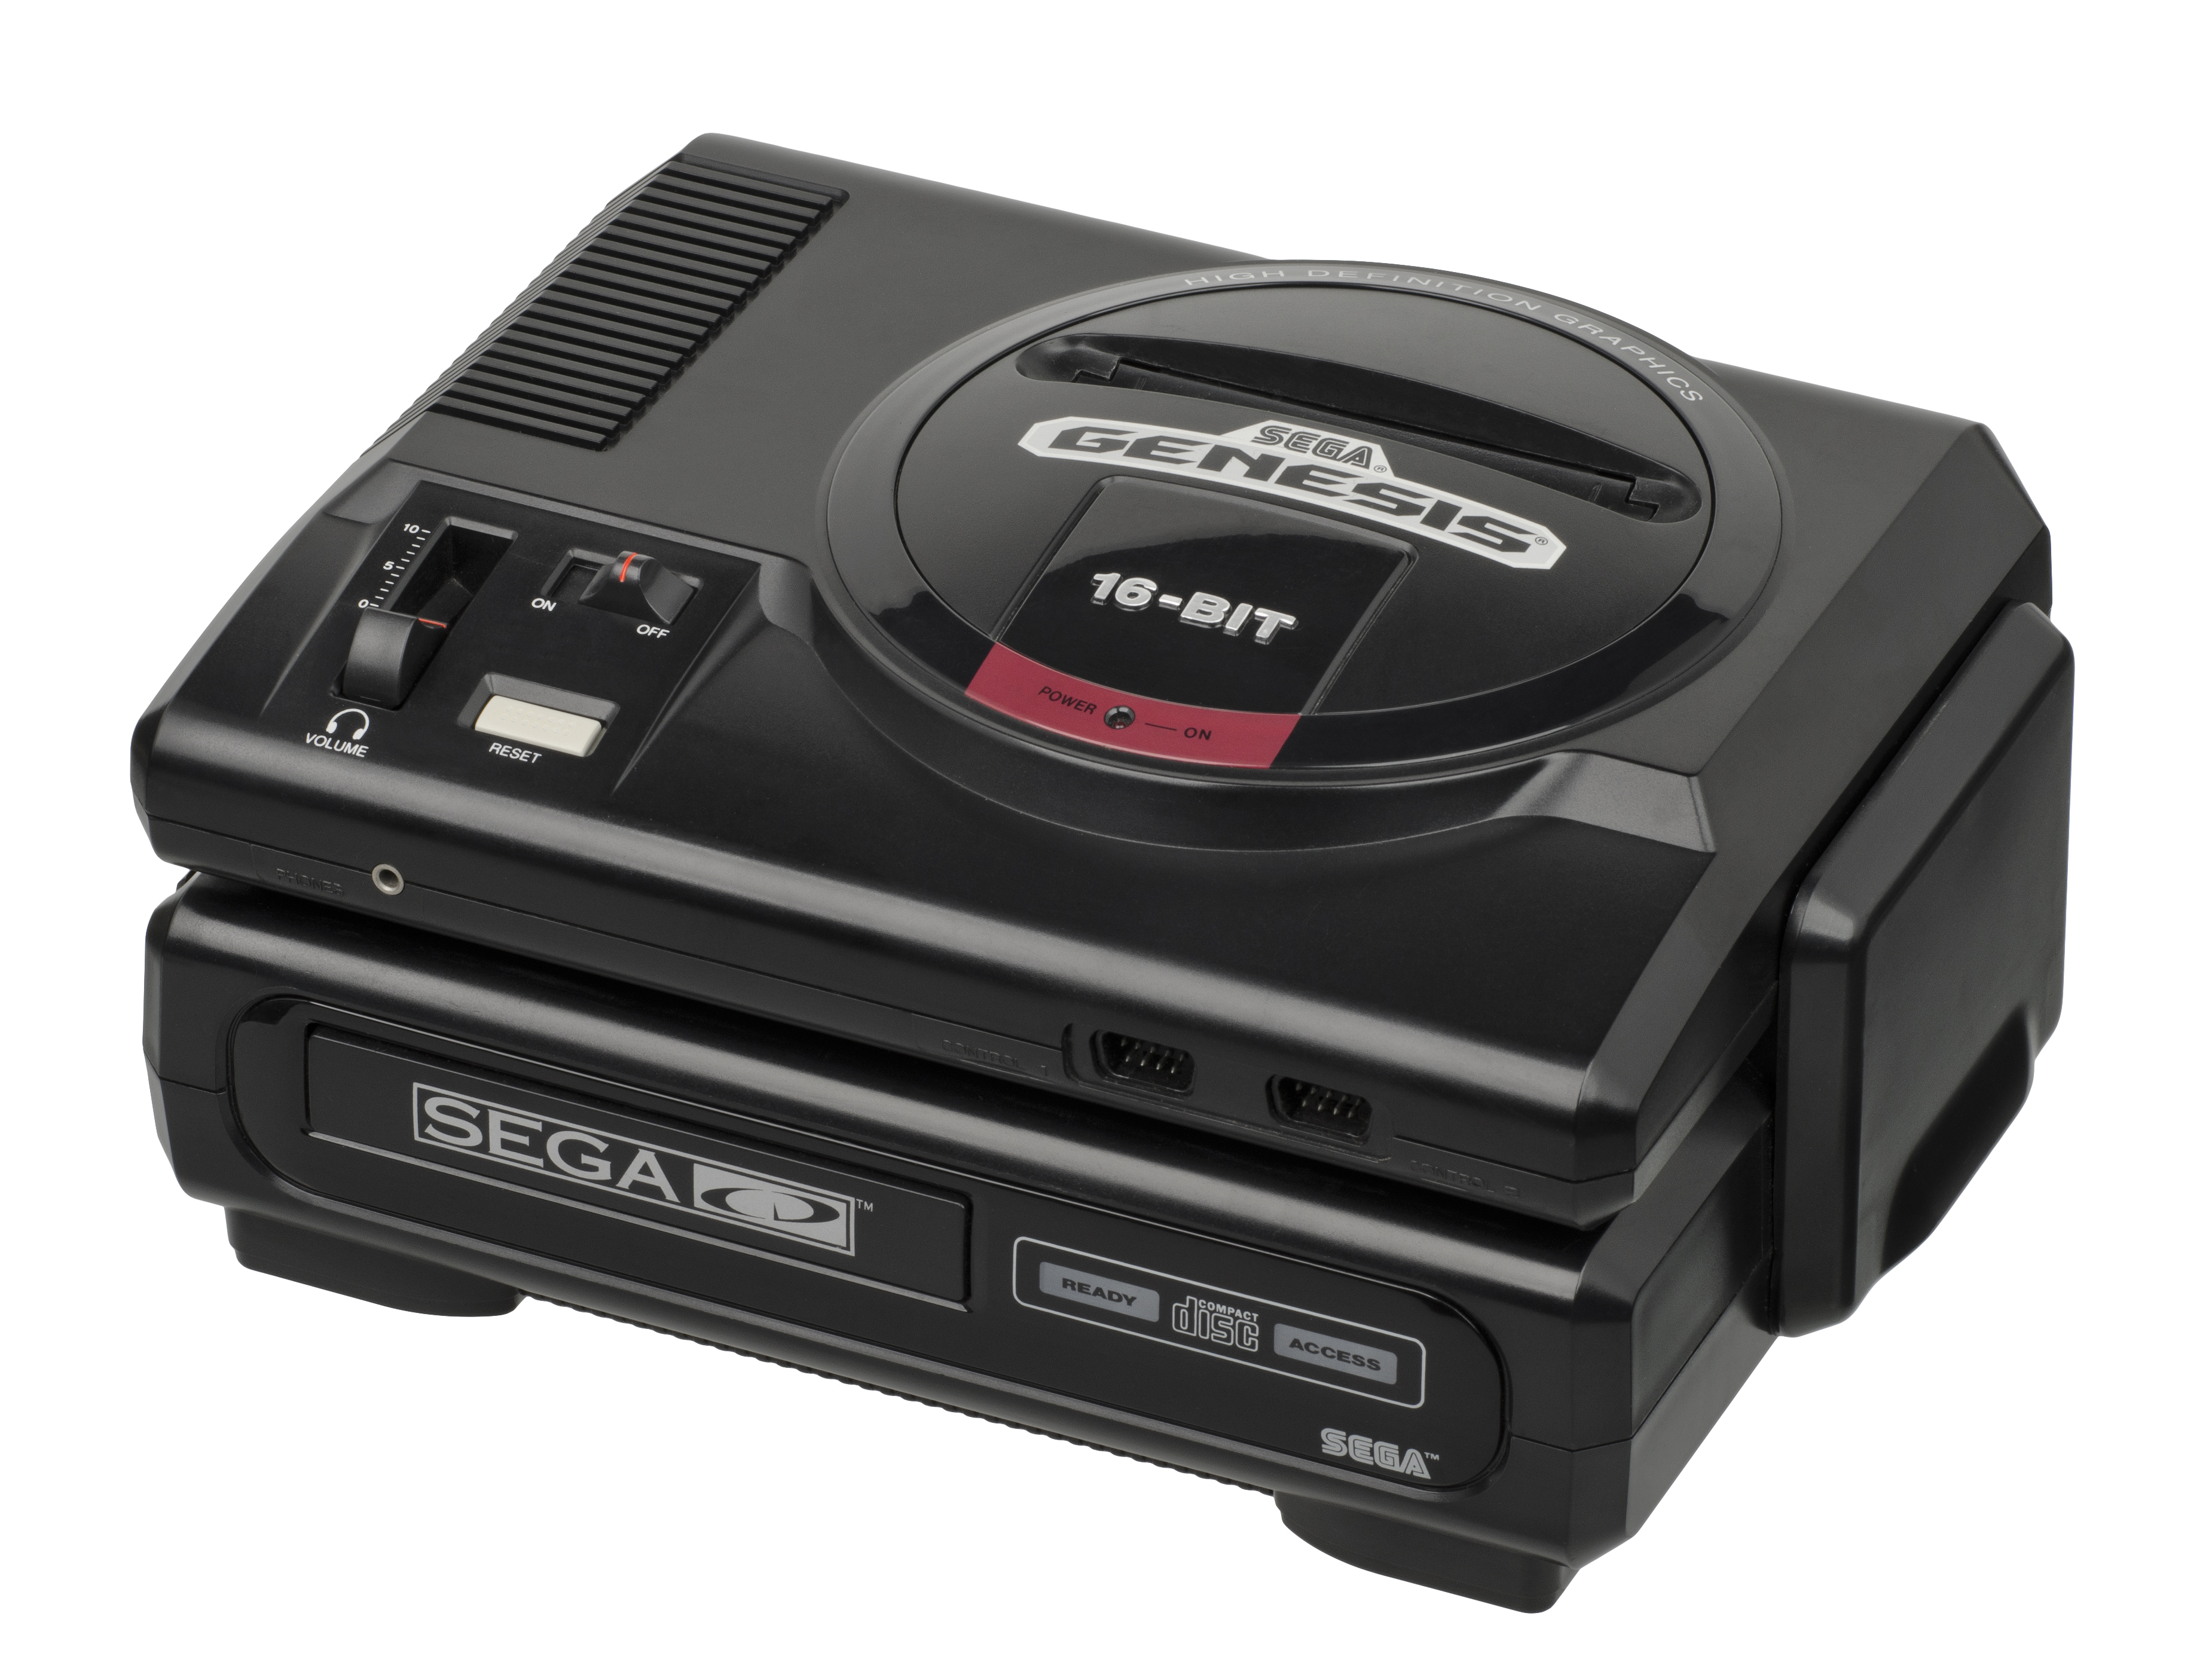 Version 1 of the Sega CD home console expansion module attached to a Sega Genesis home console without controller.